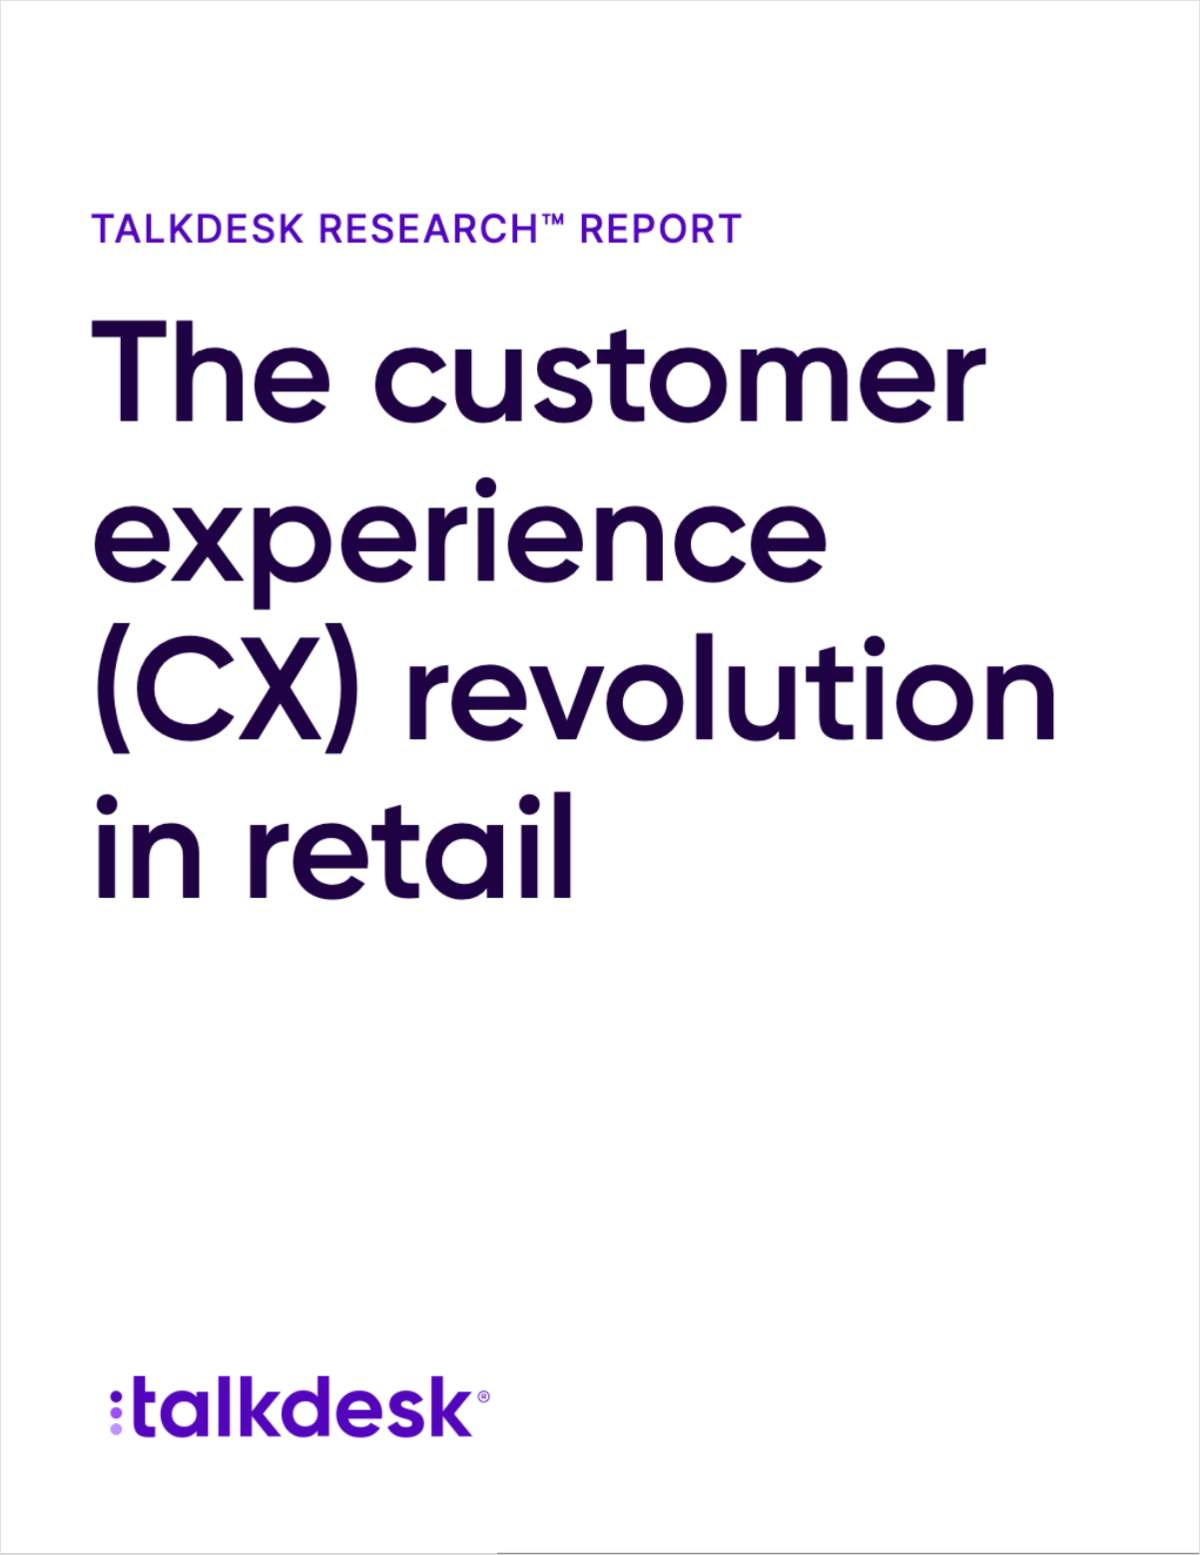 Research Report: The Customer Experience (CX) Revolution in Retail